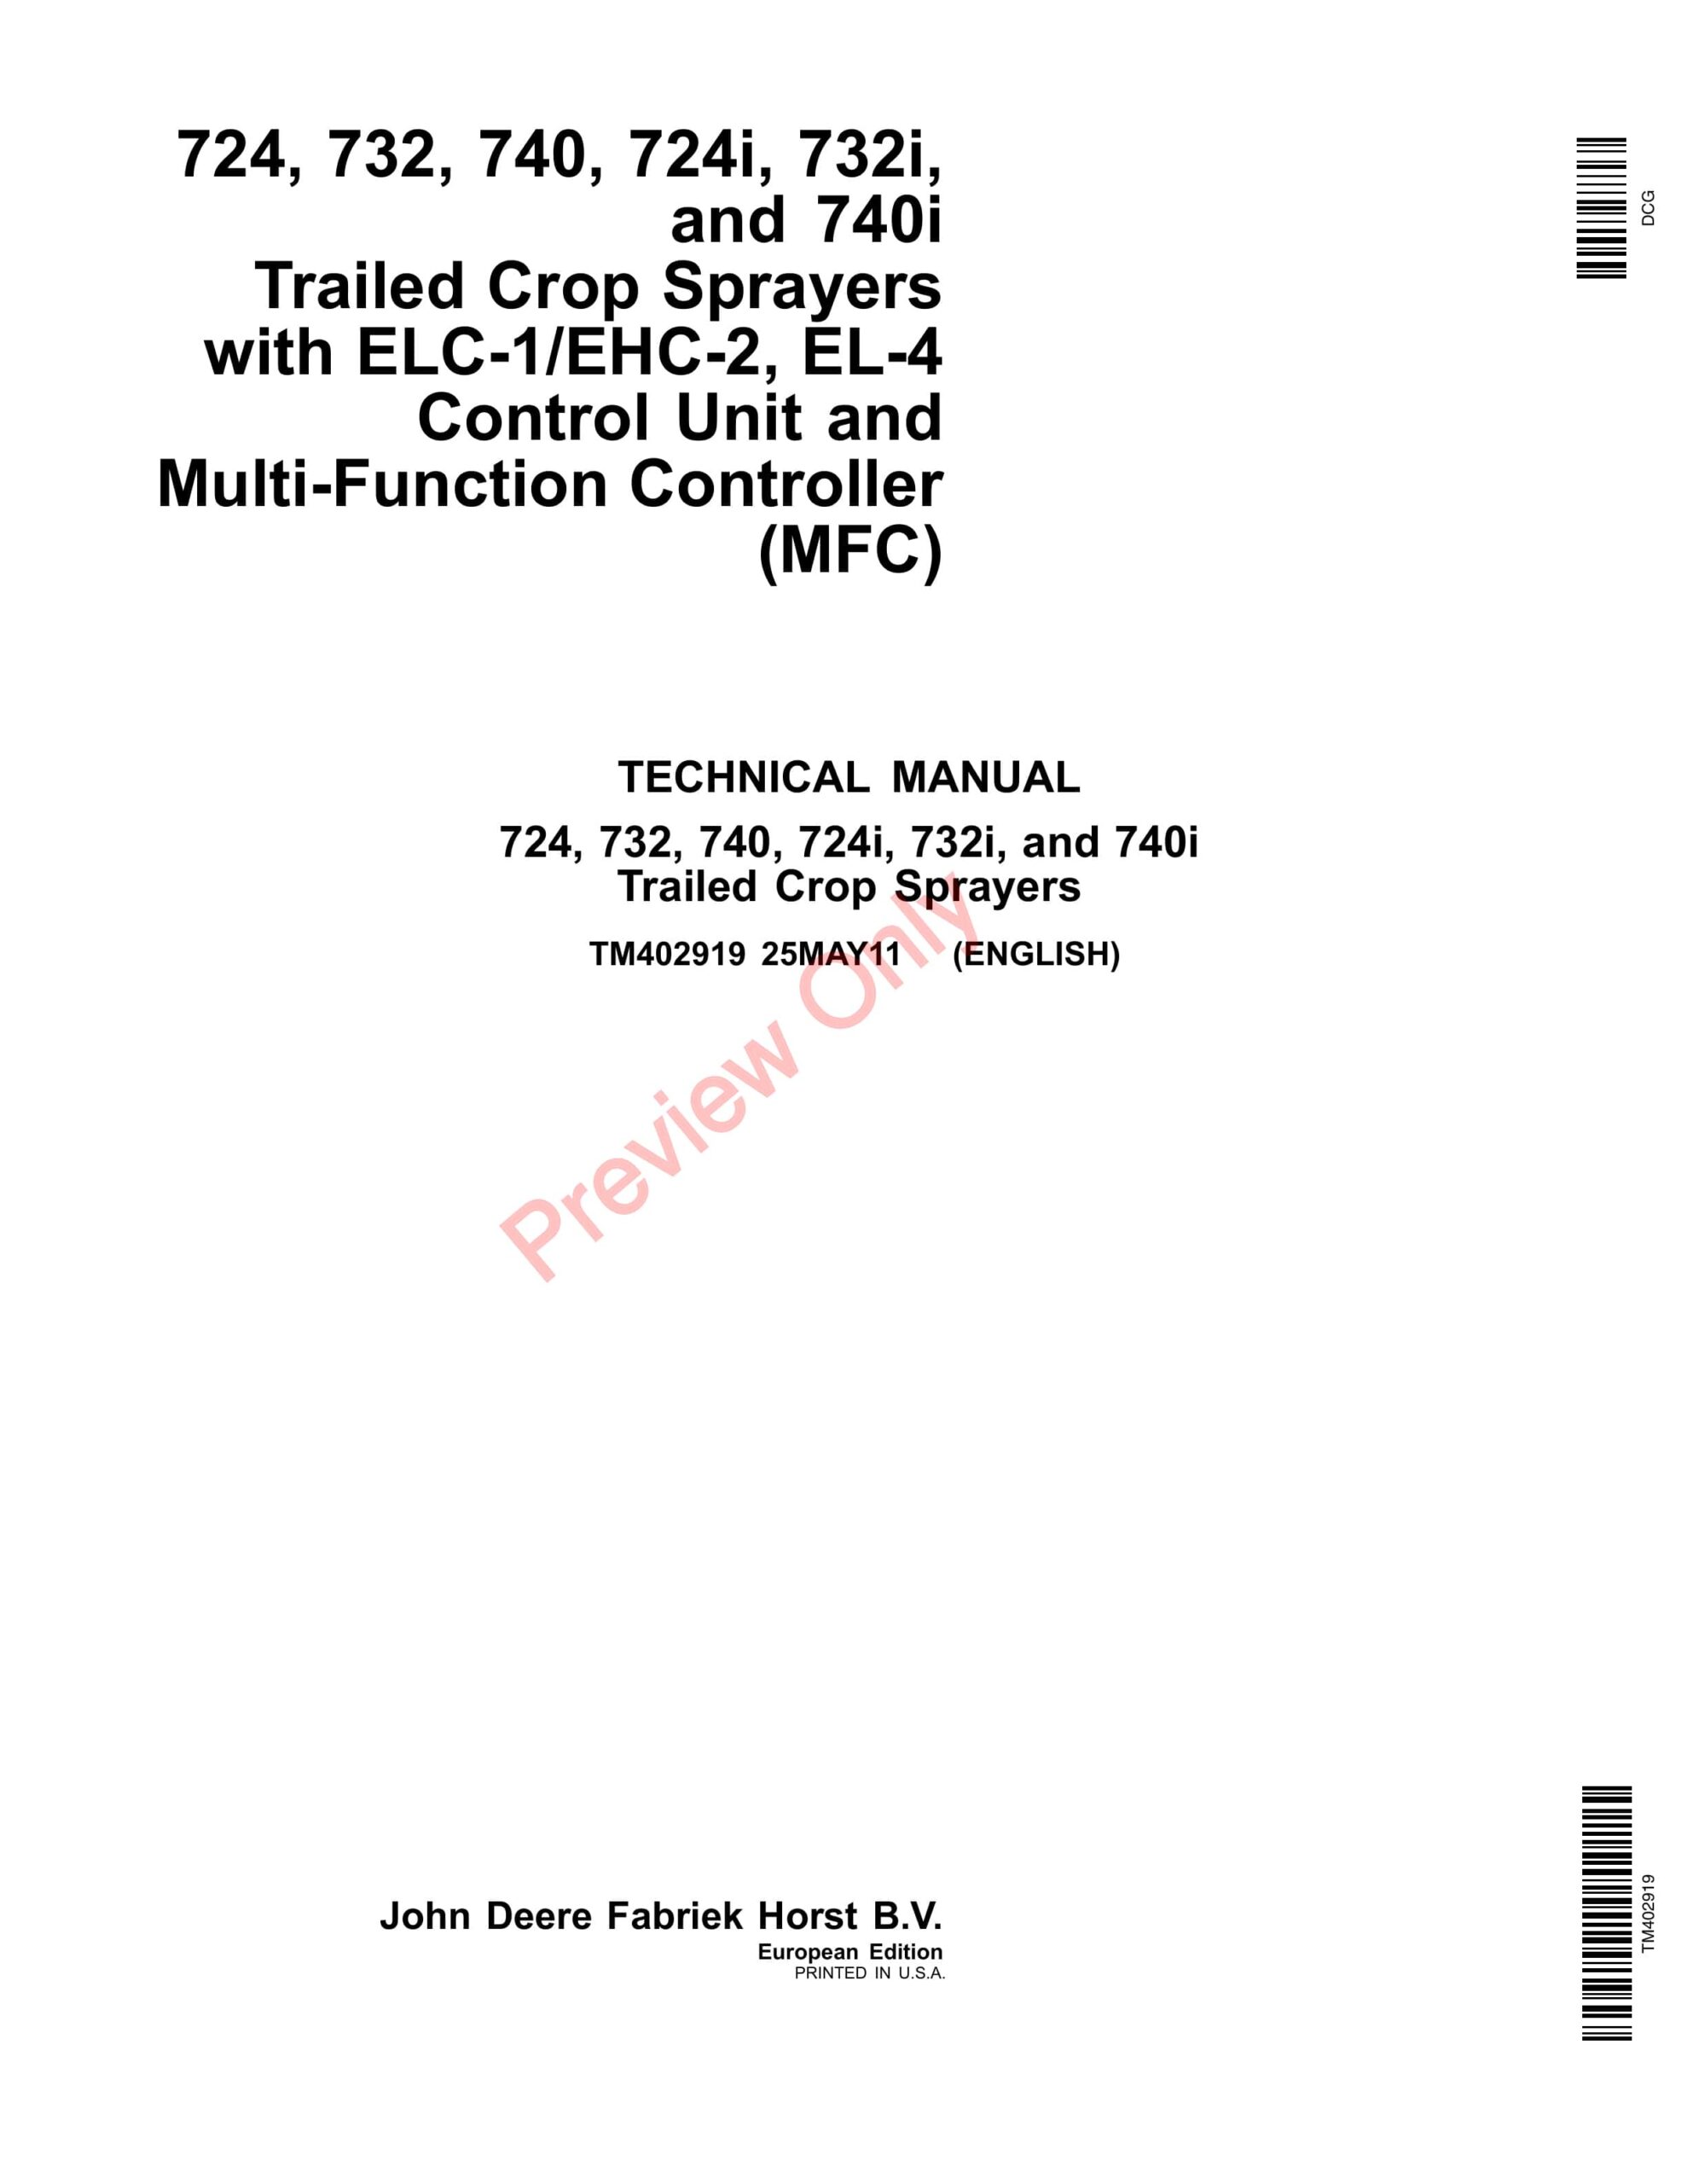 John Deere 724, 732, 740, 724i, 732i, and 740i Trailed Crop Sprayers with ELC Technical Manual TM402919 25MAY11-1